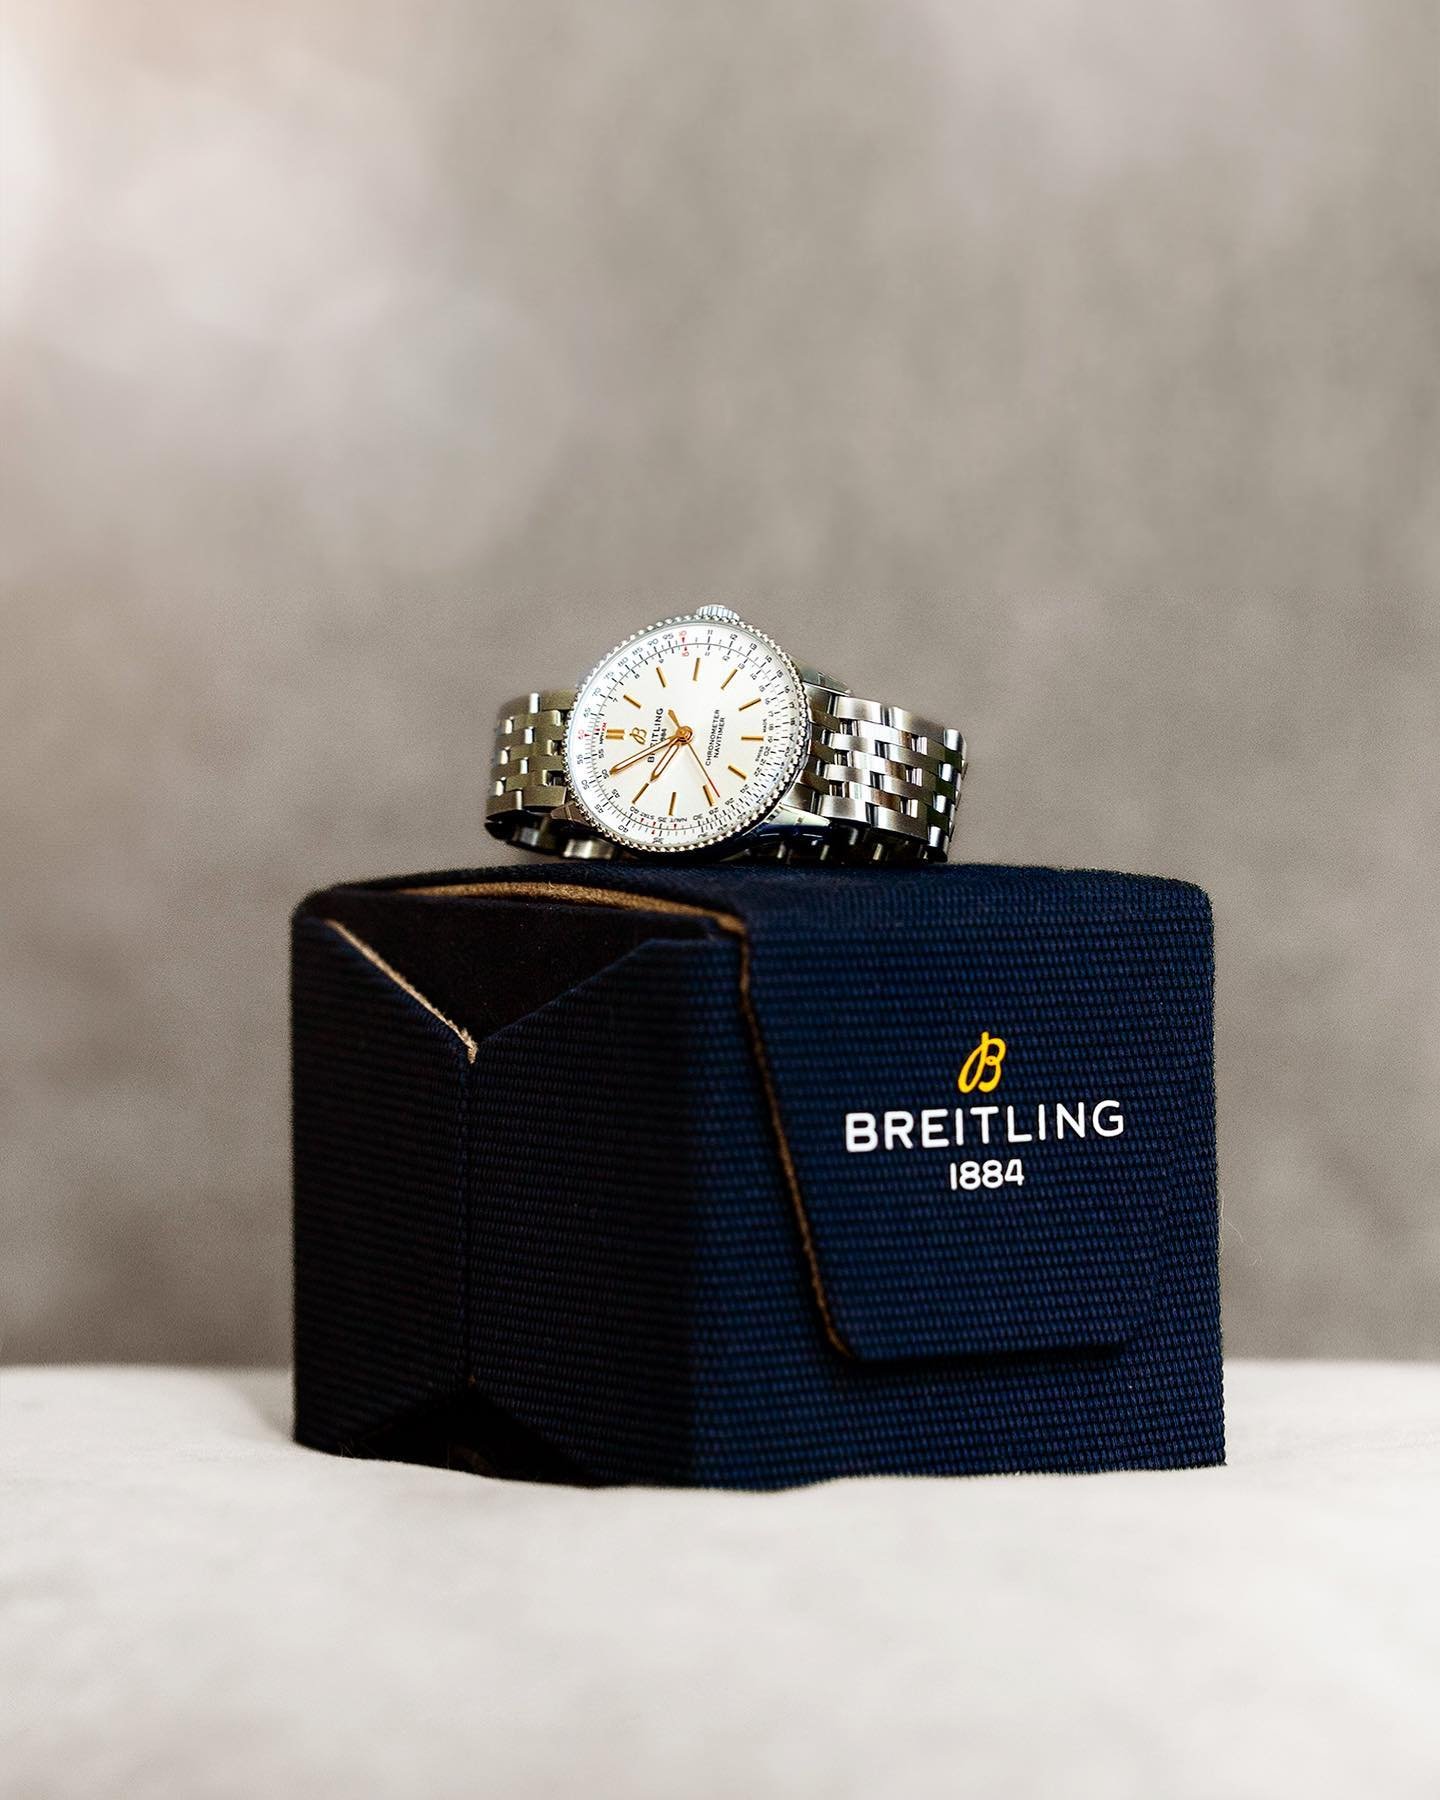 Time to play with my new Navitime 36&hellip;.. Thank you Clara and the rest of the team at @breitling_stockholm_squad 💛!
@breitling 
@lindisimaphotography 
#breitling #breitlingwatch #breitlingnavitimer #navitimer #productphotography #canonr5 #breit